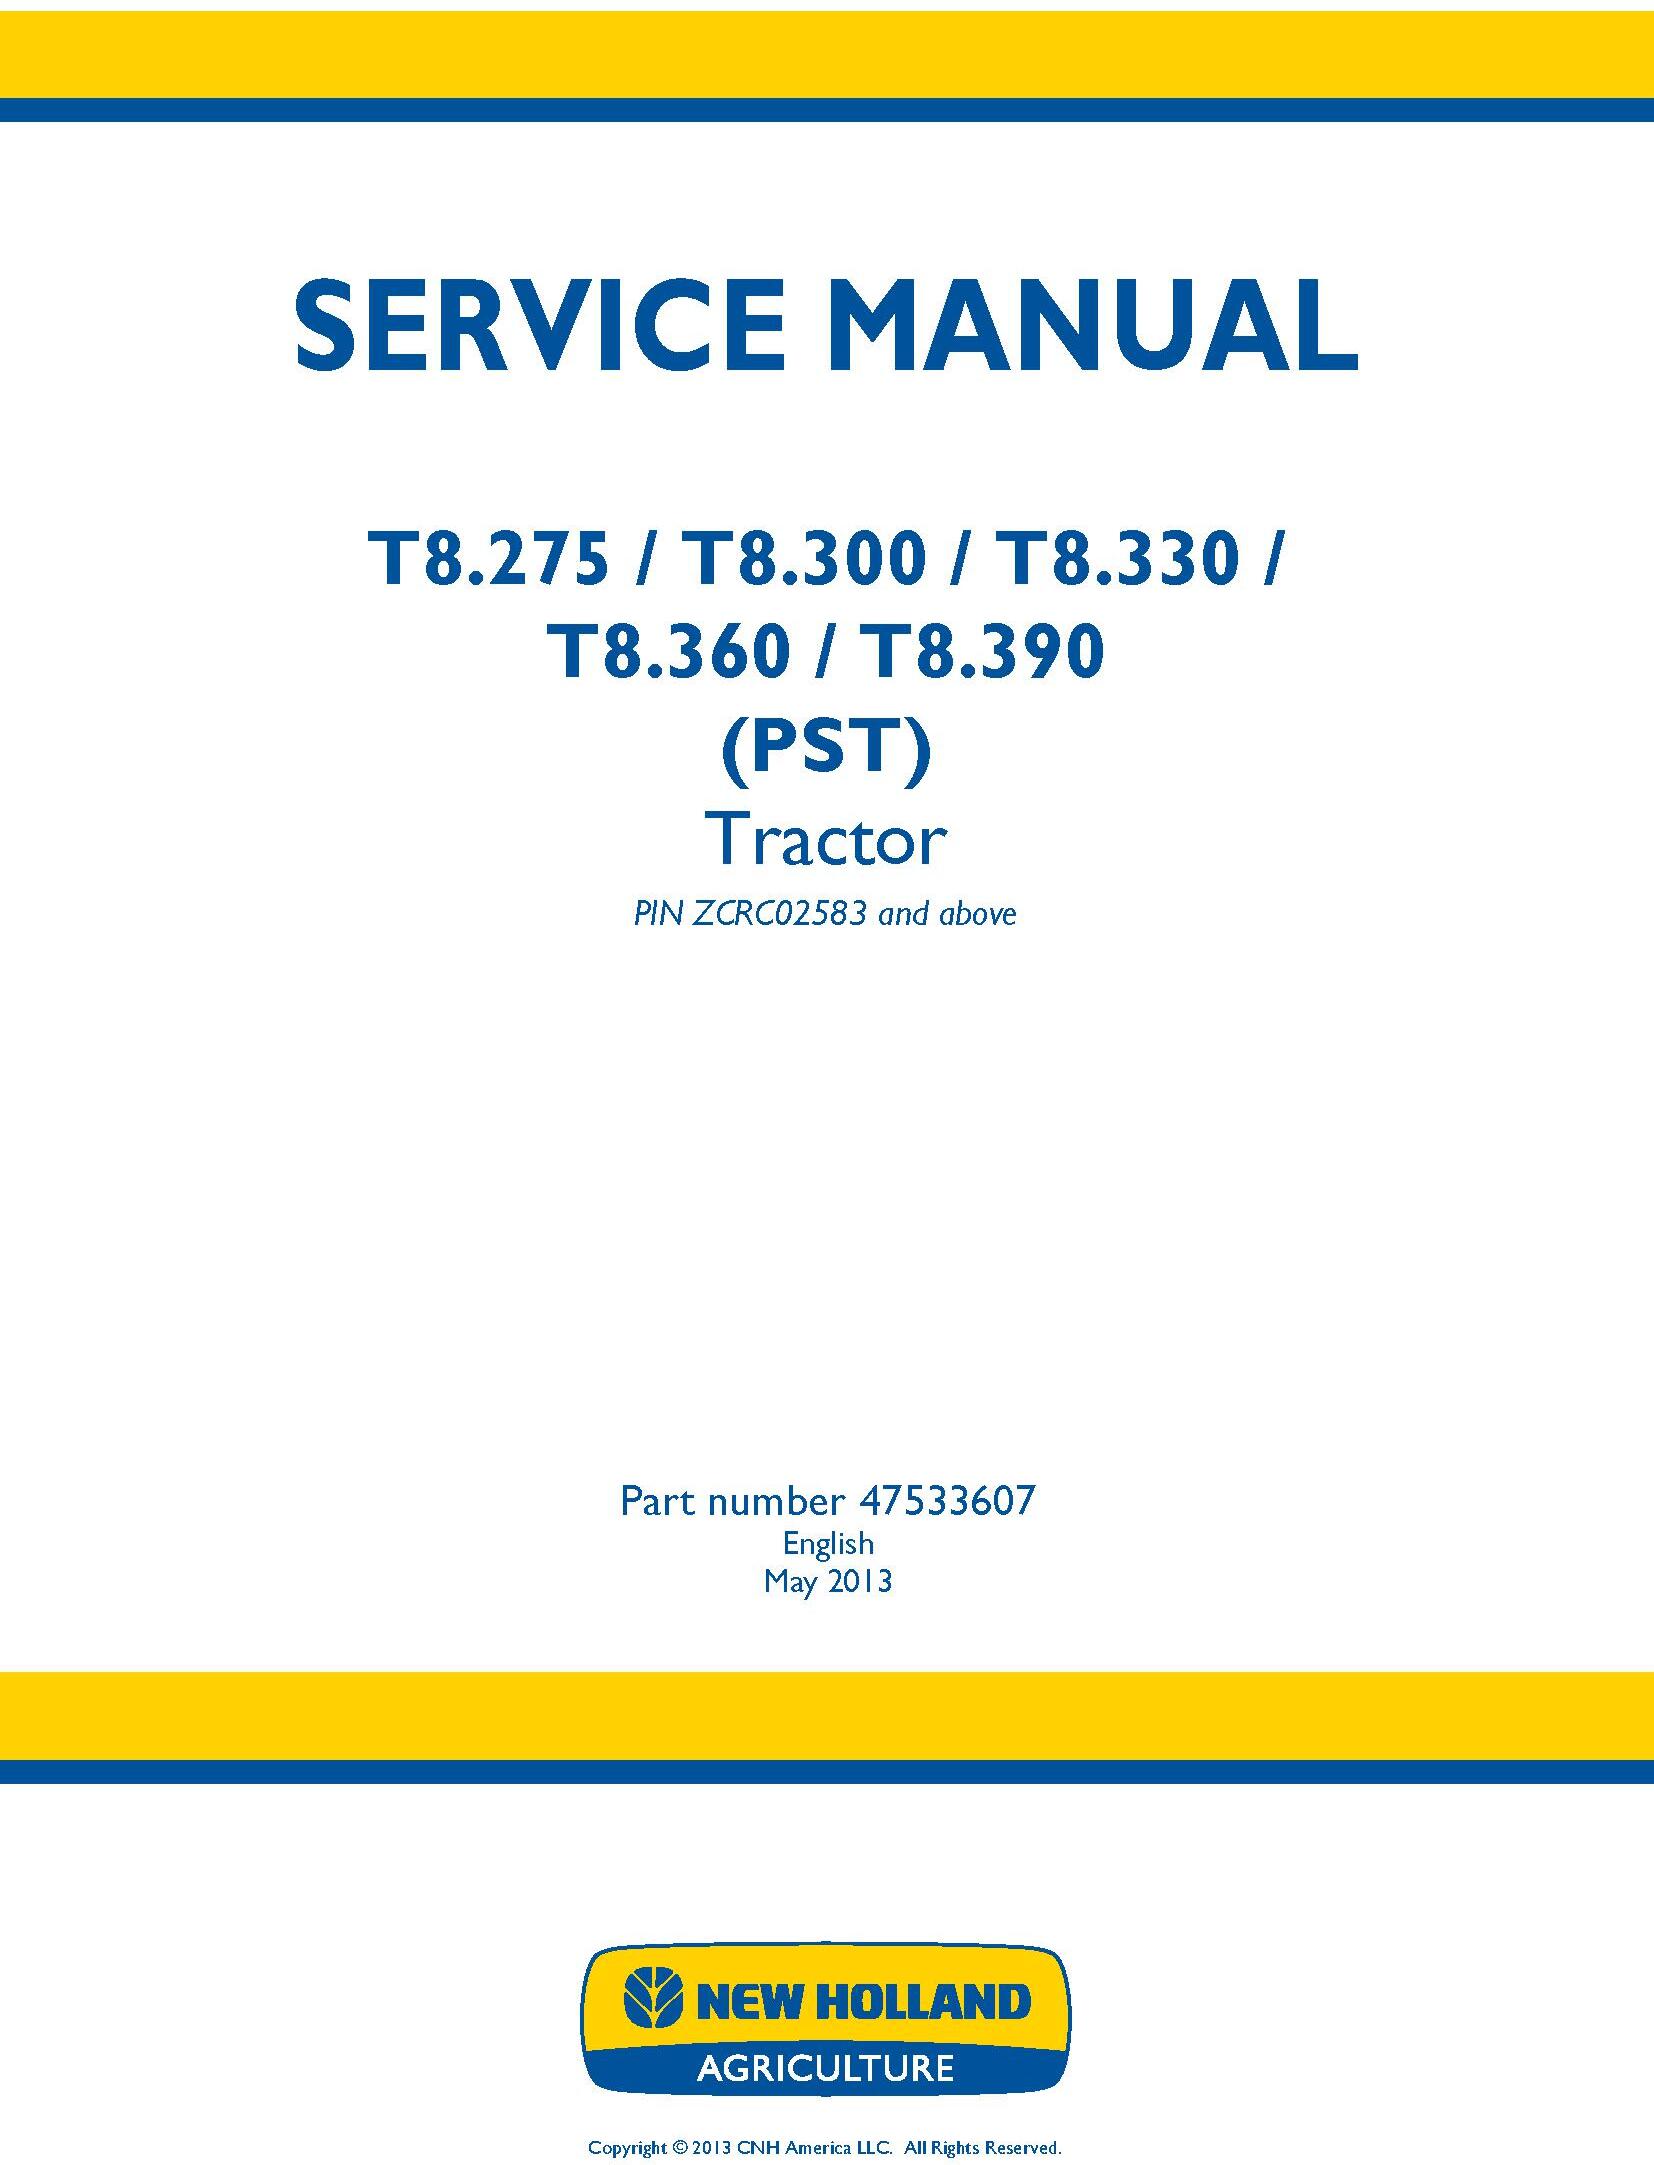 New Holland T8.275, T8.300, T8.330, T8.360, T8.390 (PST) Tractor (PIN ZCRC02583-) Service Manual - 19391